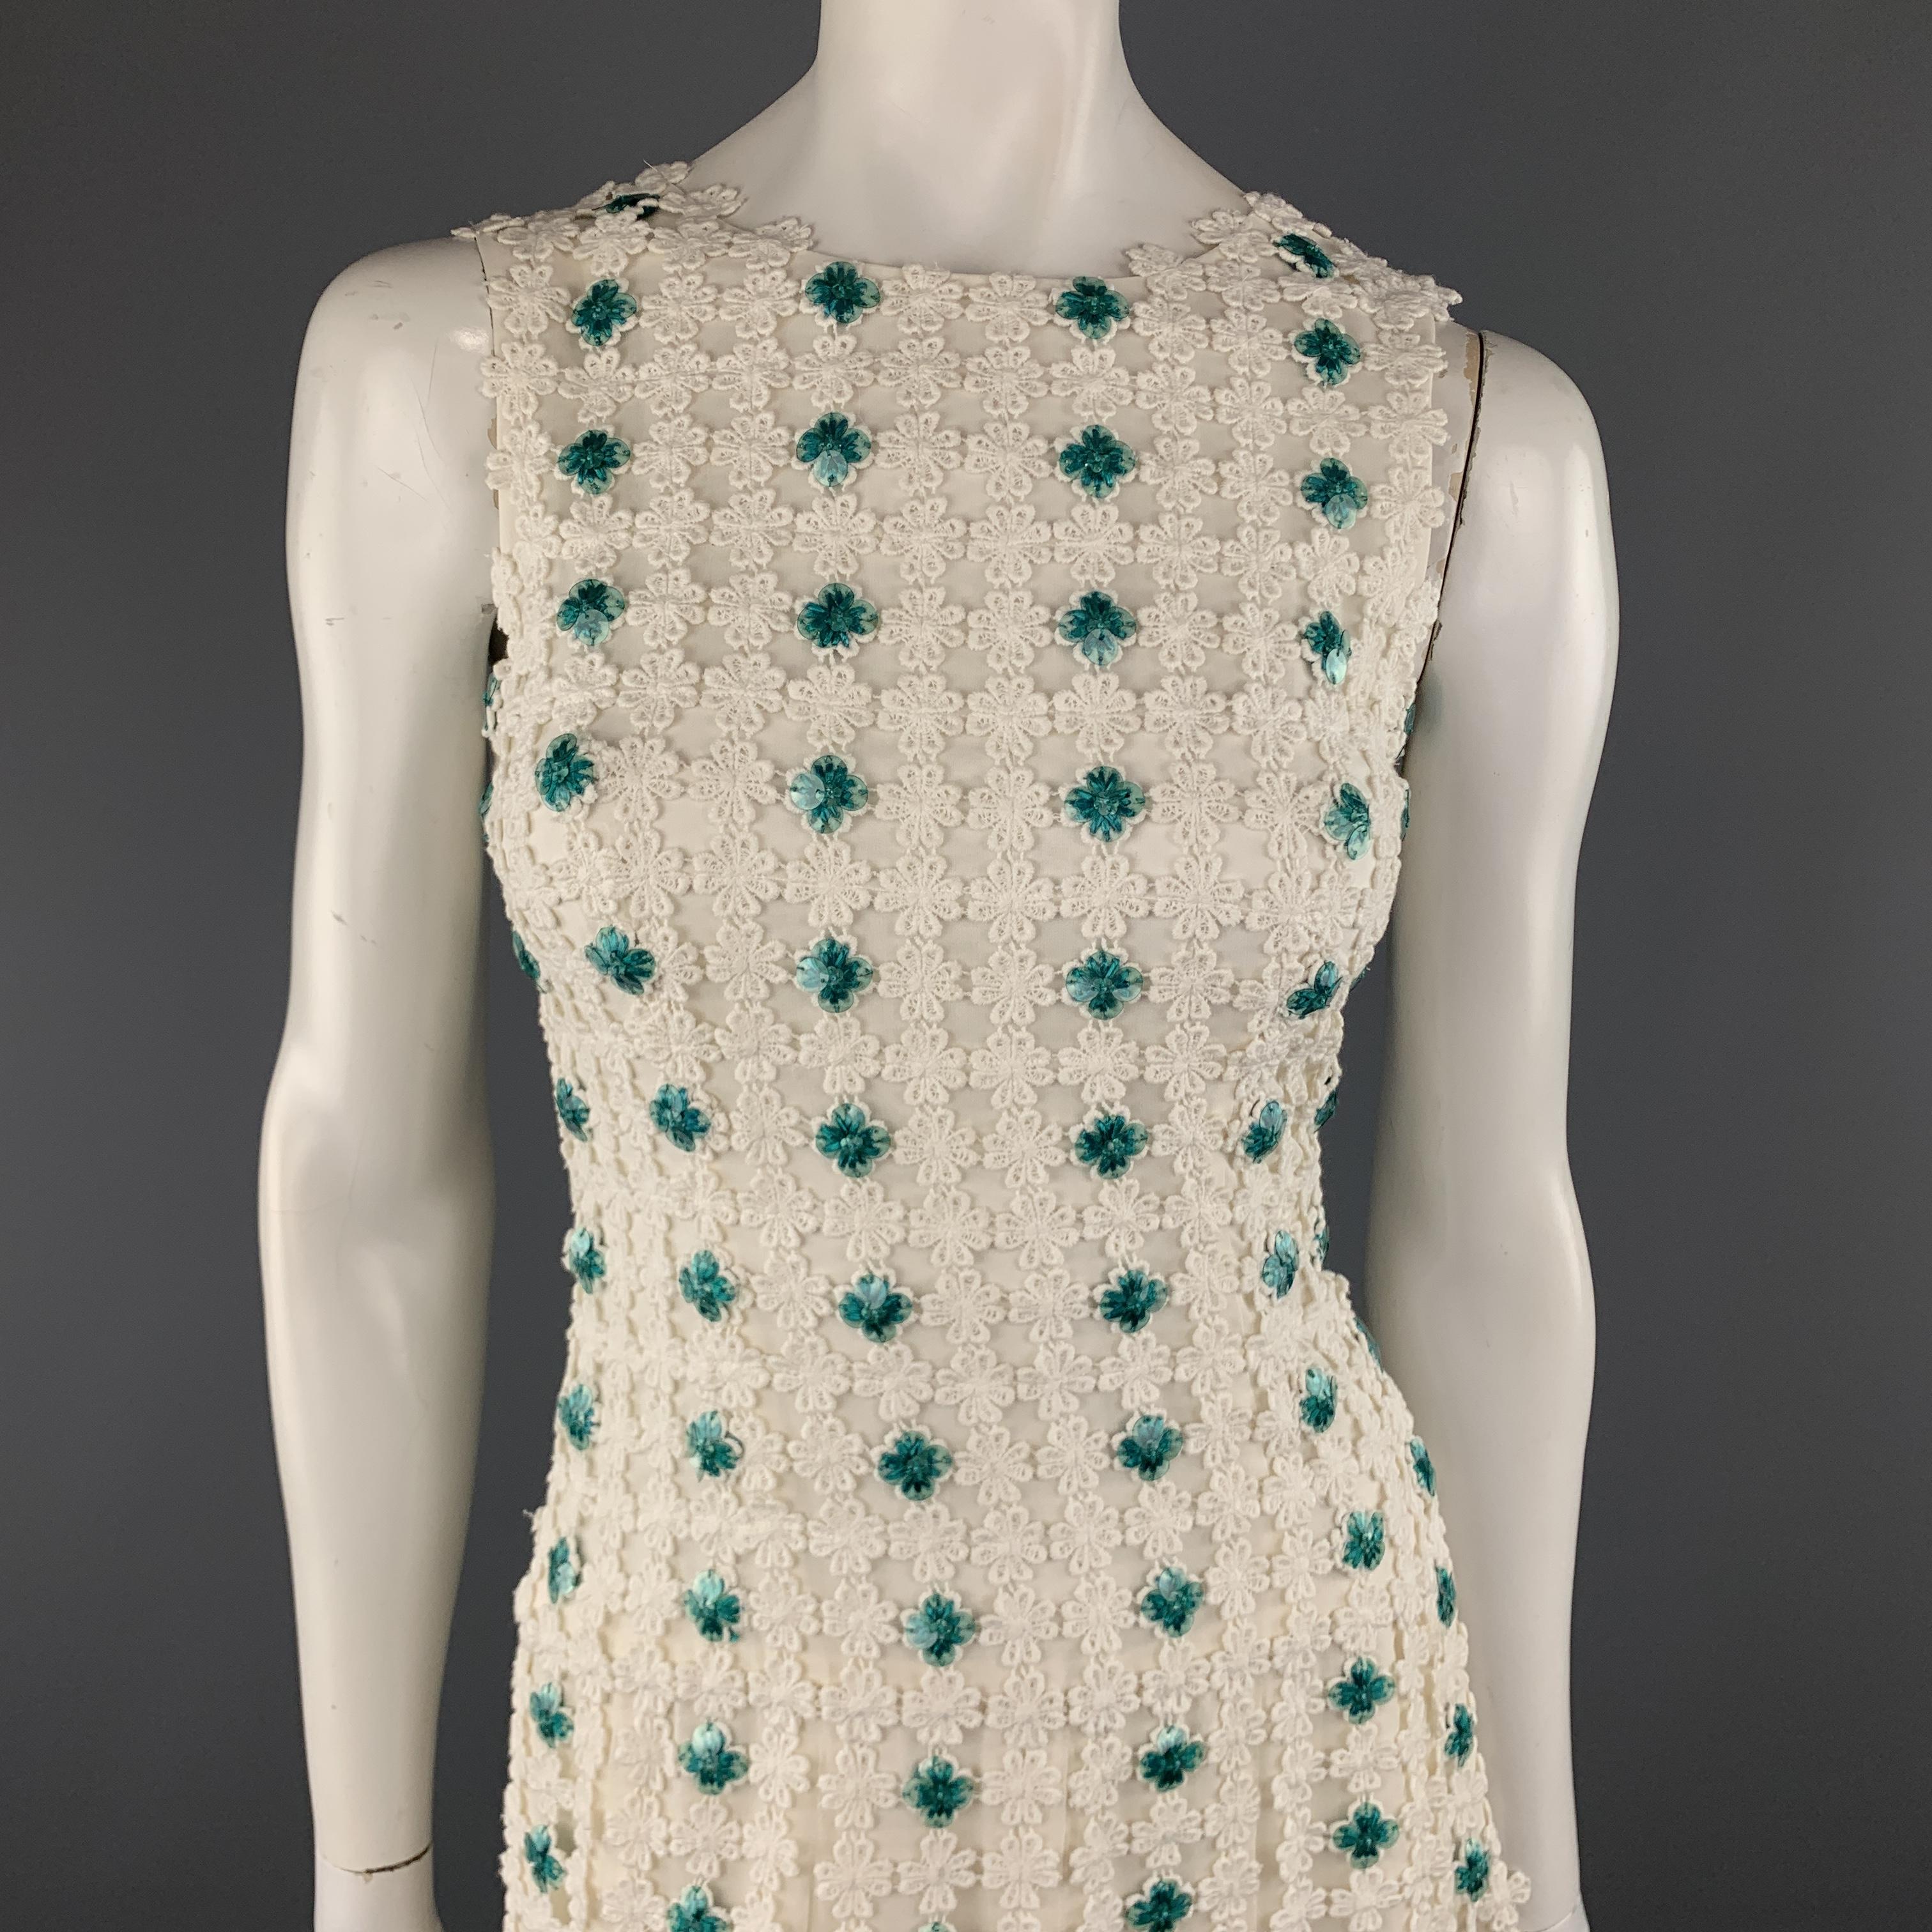 OSCAR DE LA RENTA Spring 2014 Collection sheath dress comes in cream silk chiffon with a lace overlay, pleated skirt, and turquoise green sequin flower details throughout. Made in USA.

Excellent Pre-Owned Condition.
Marked: